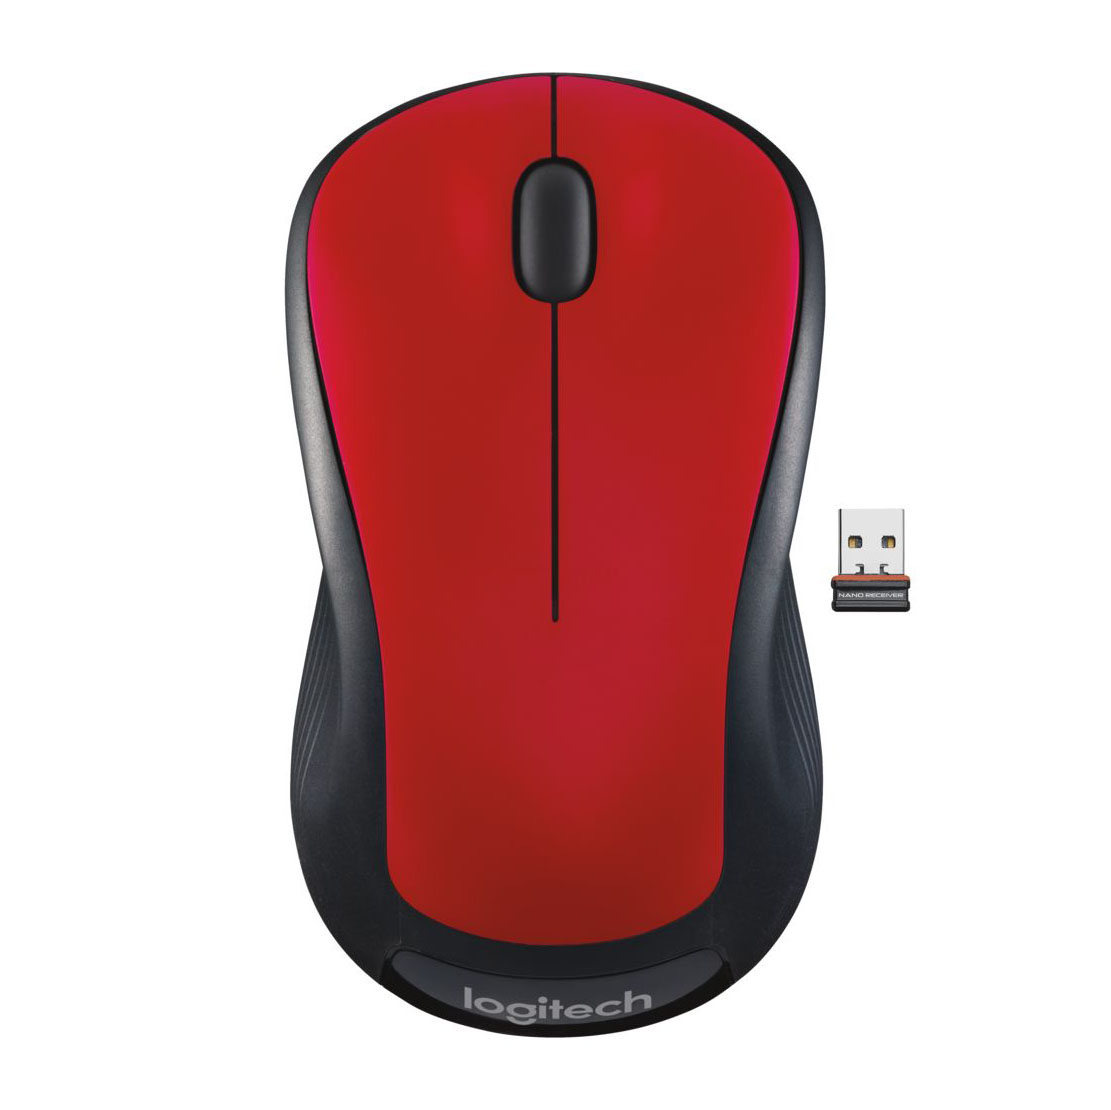 Logitech Full-Size Wireless Mouse, USB Nano Receiver, 1000 DPI Optical Tracking, Ambidextrous, Red - image 1 of 5